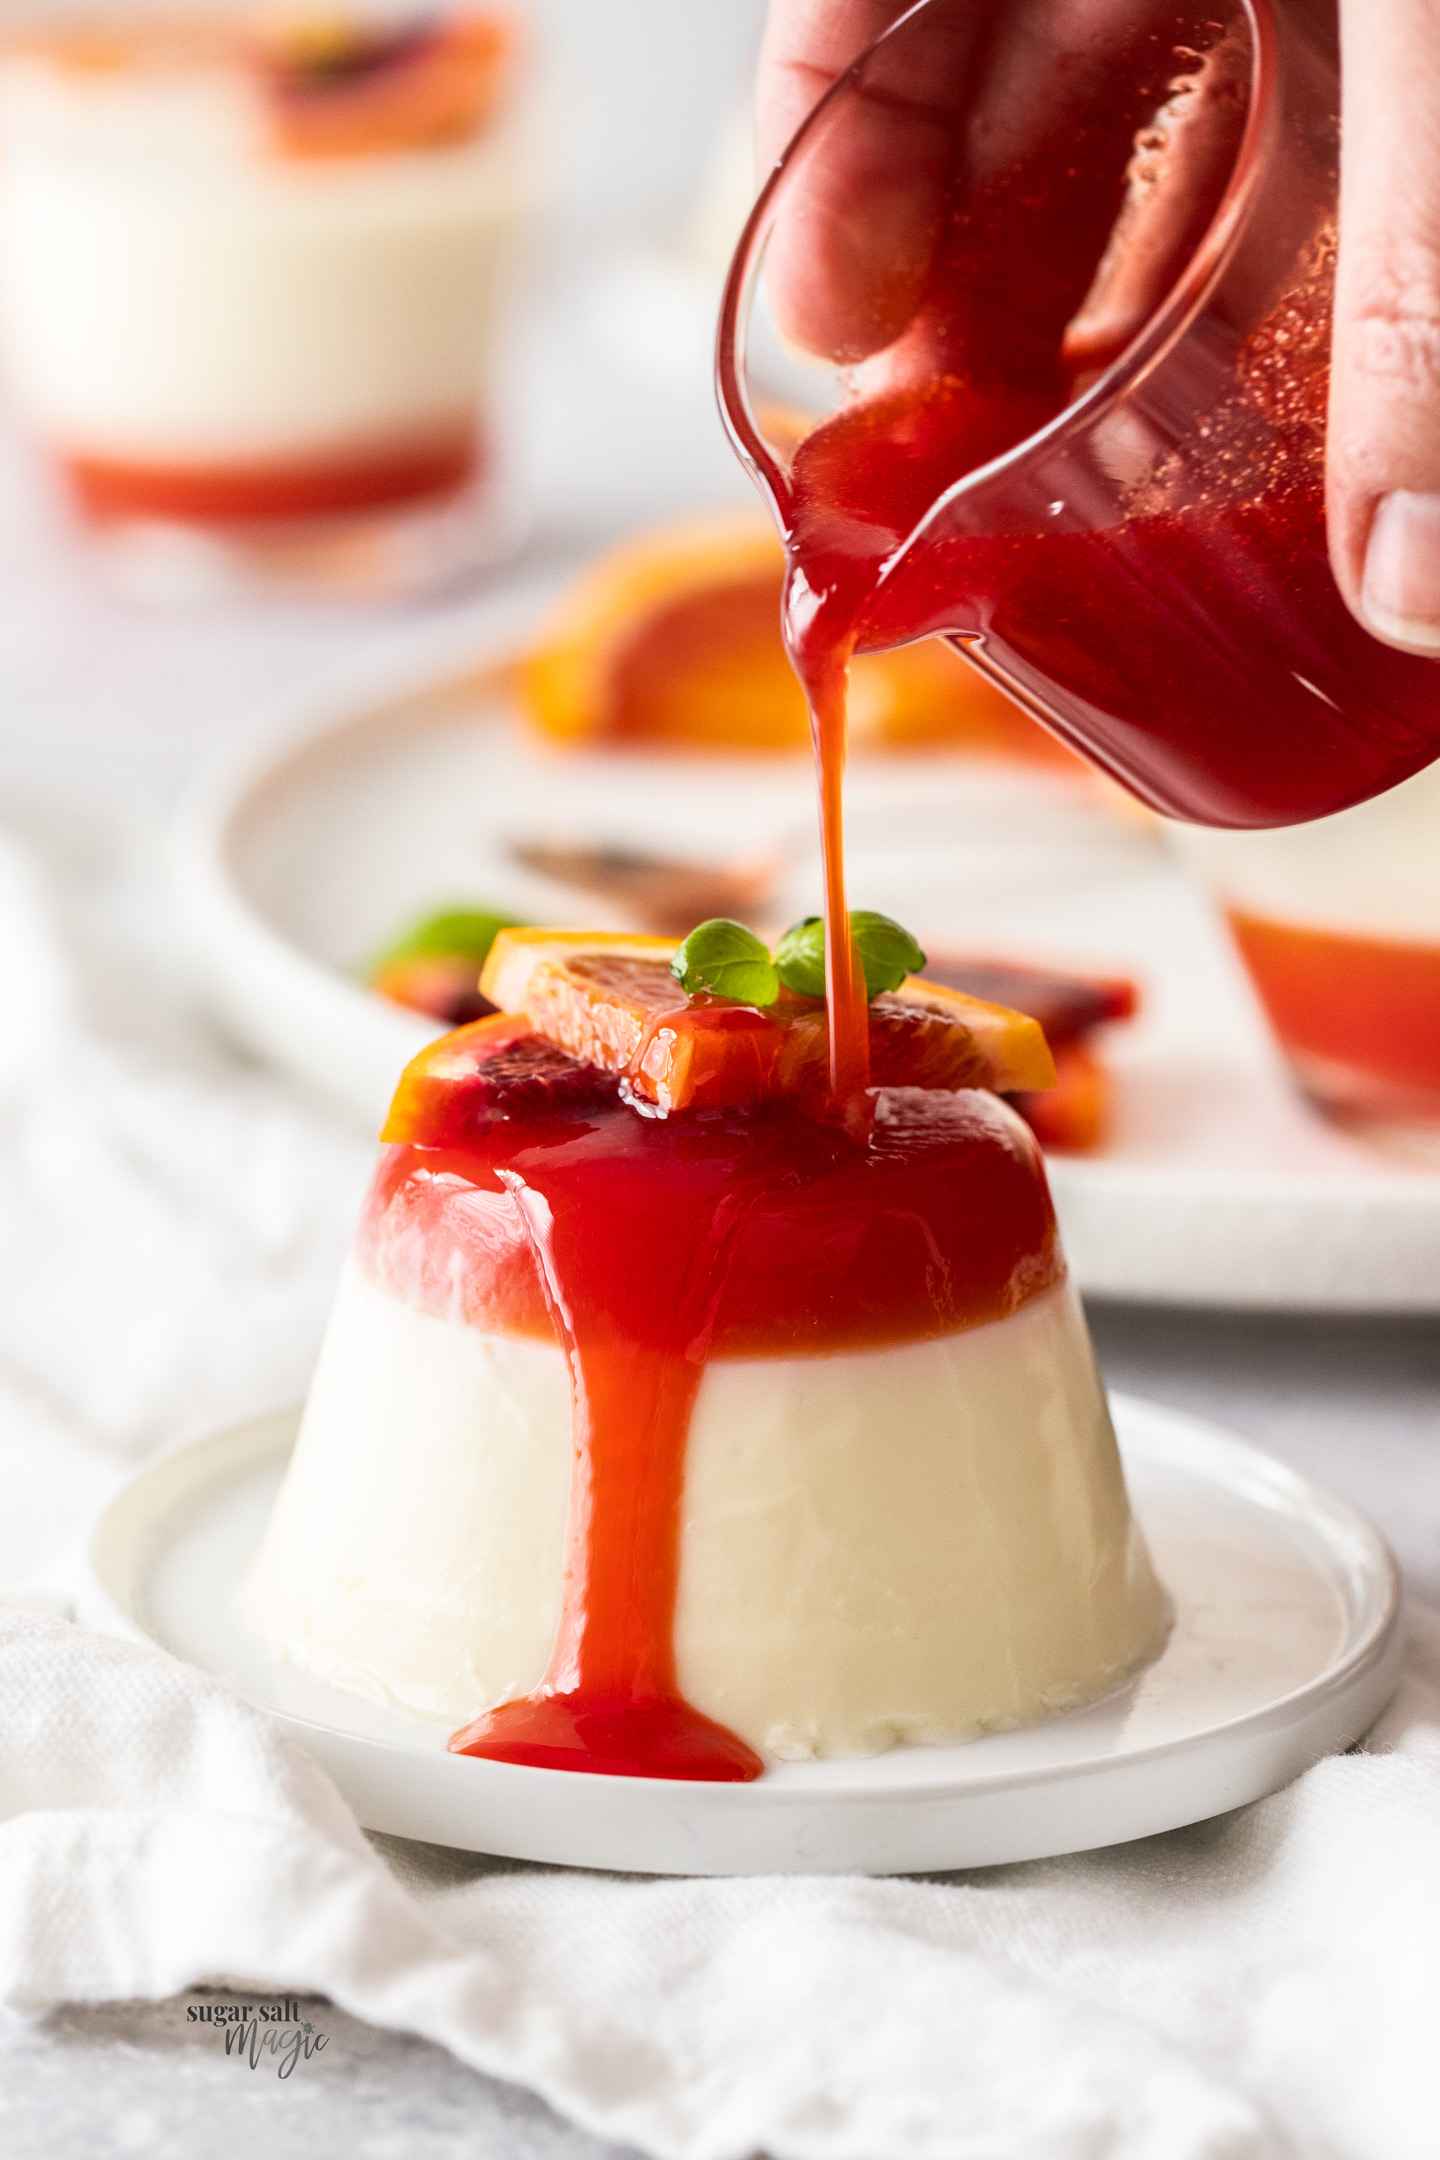 Blood orange syrup being poured over a buttermilk panna cotta.